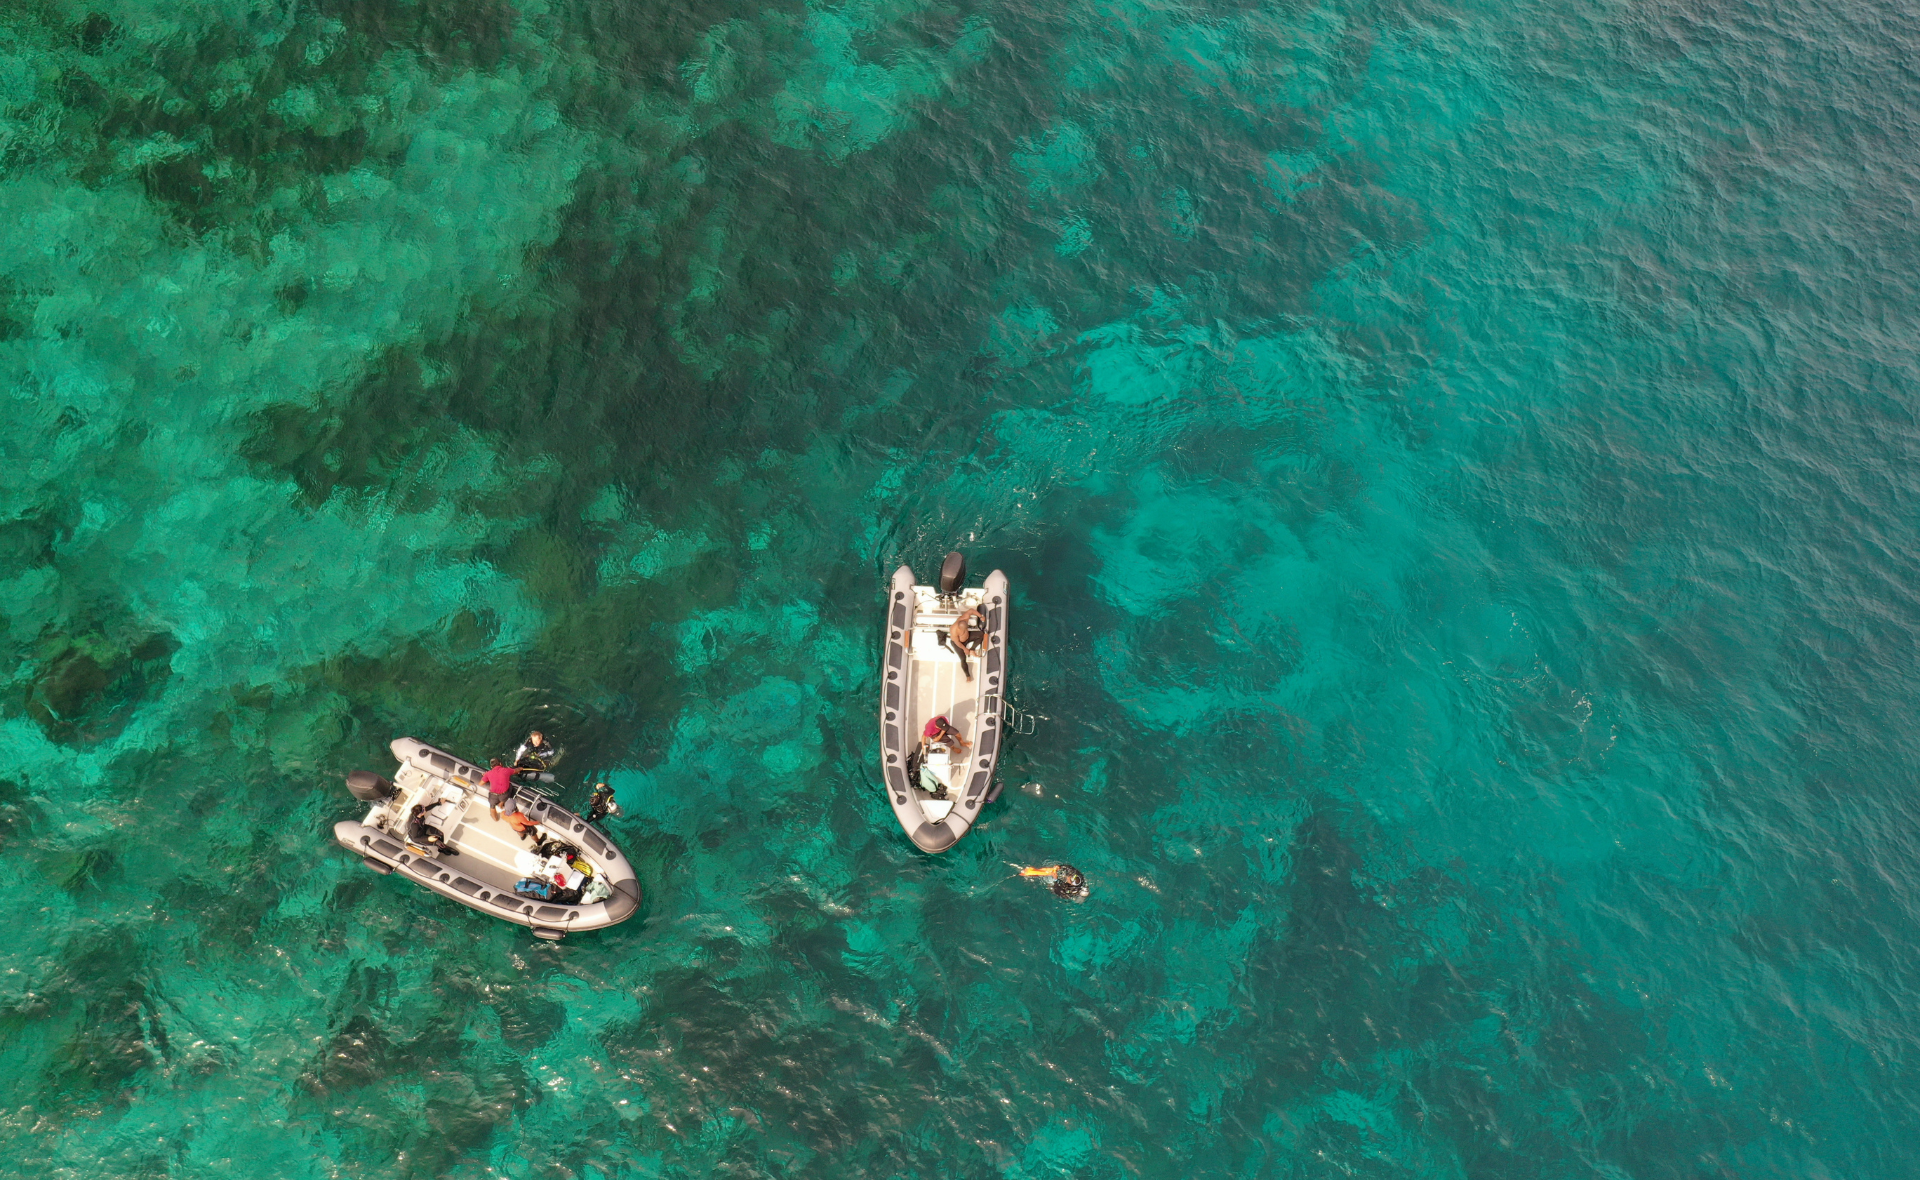 An image seen from above of two inflatable boats floating on clear turquoise water in Raja Ampat, Indonesia. The boats hold two and three people each and there are three divers swimming near them.